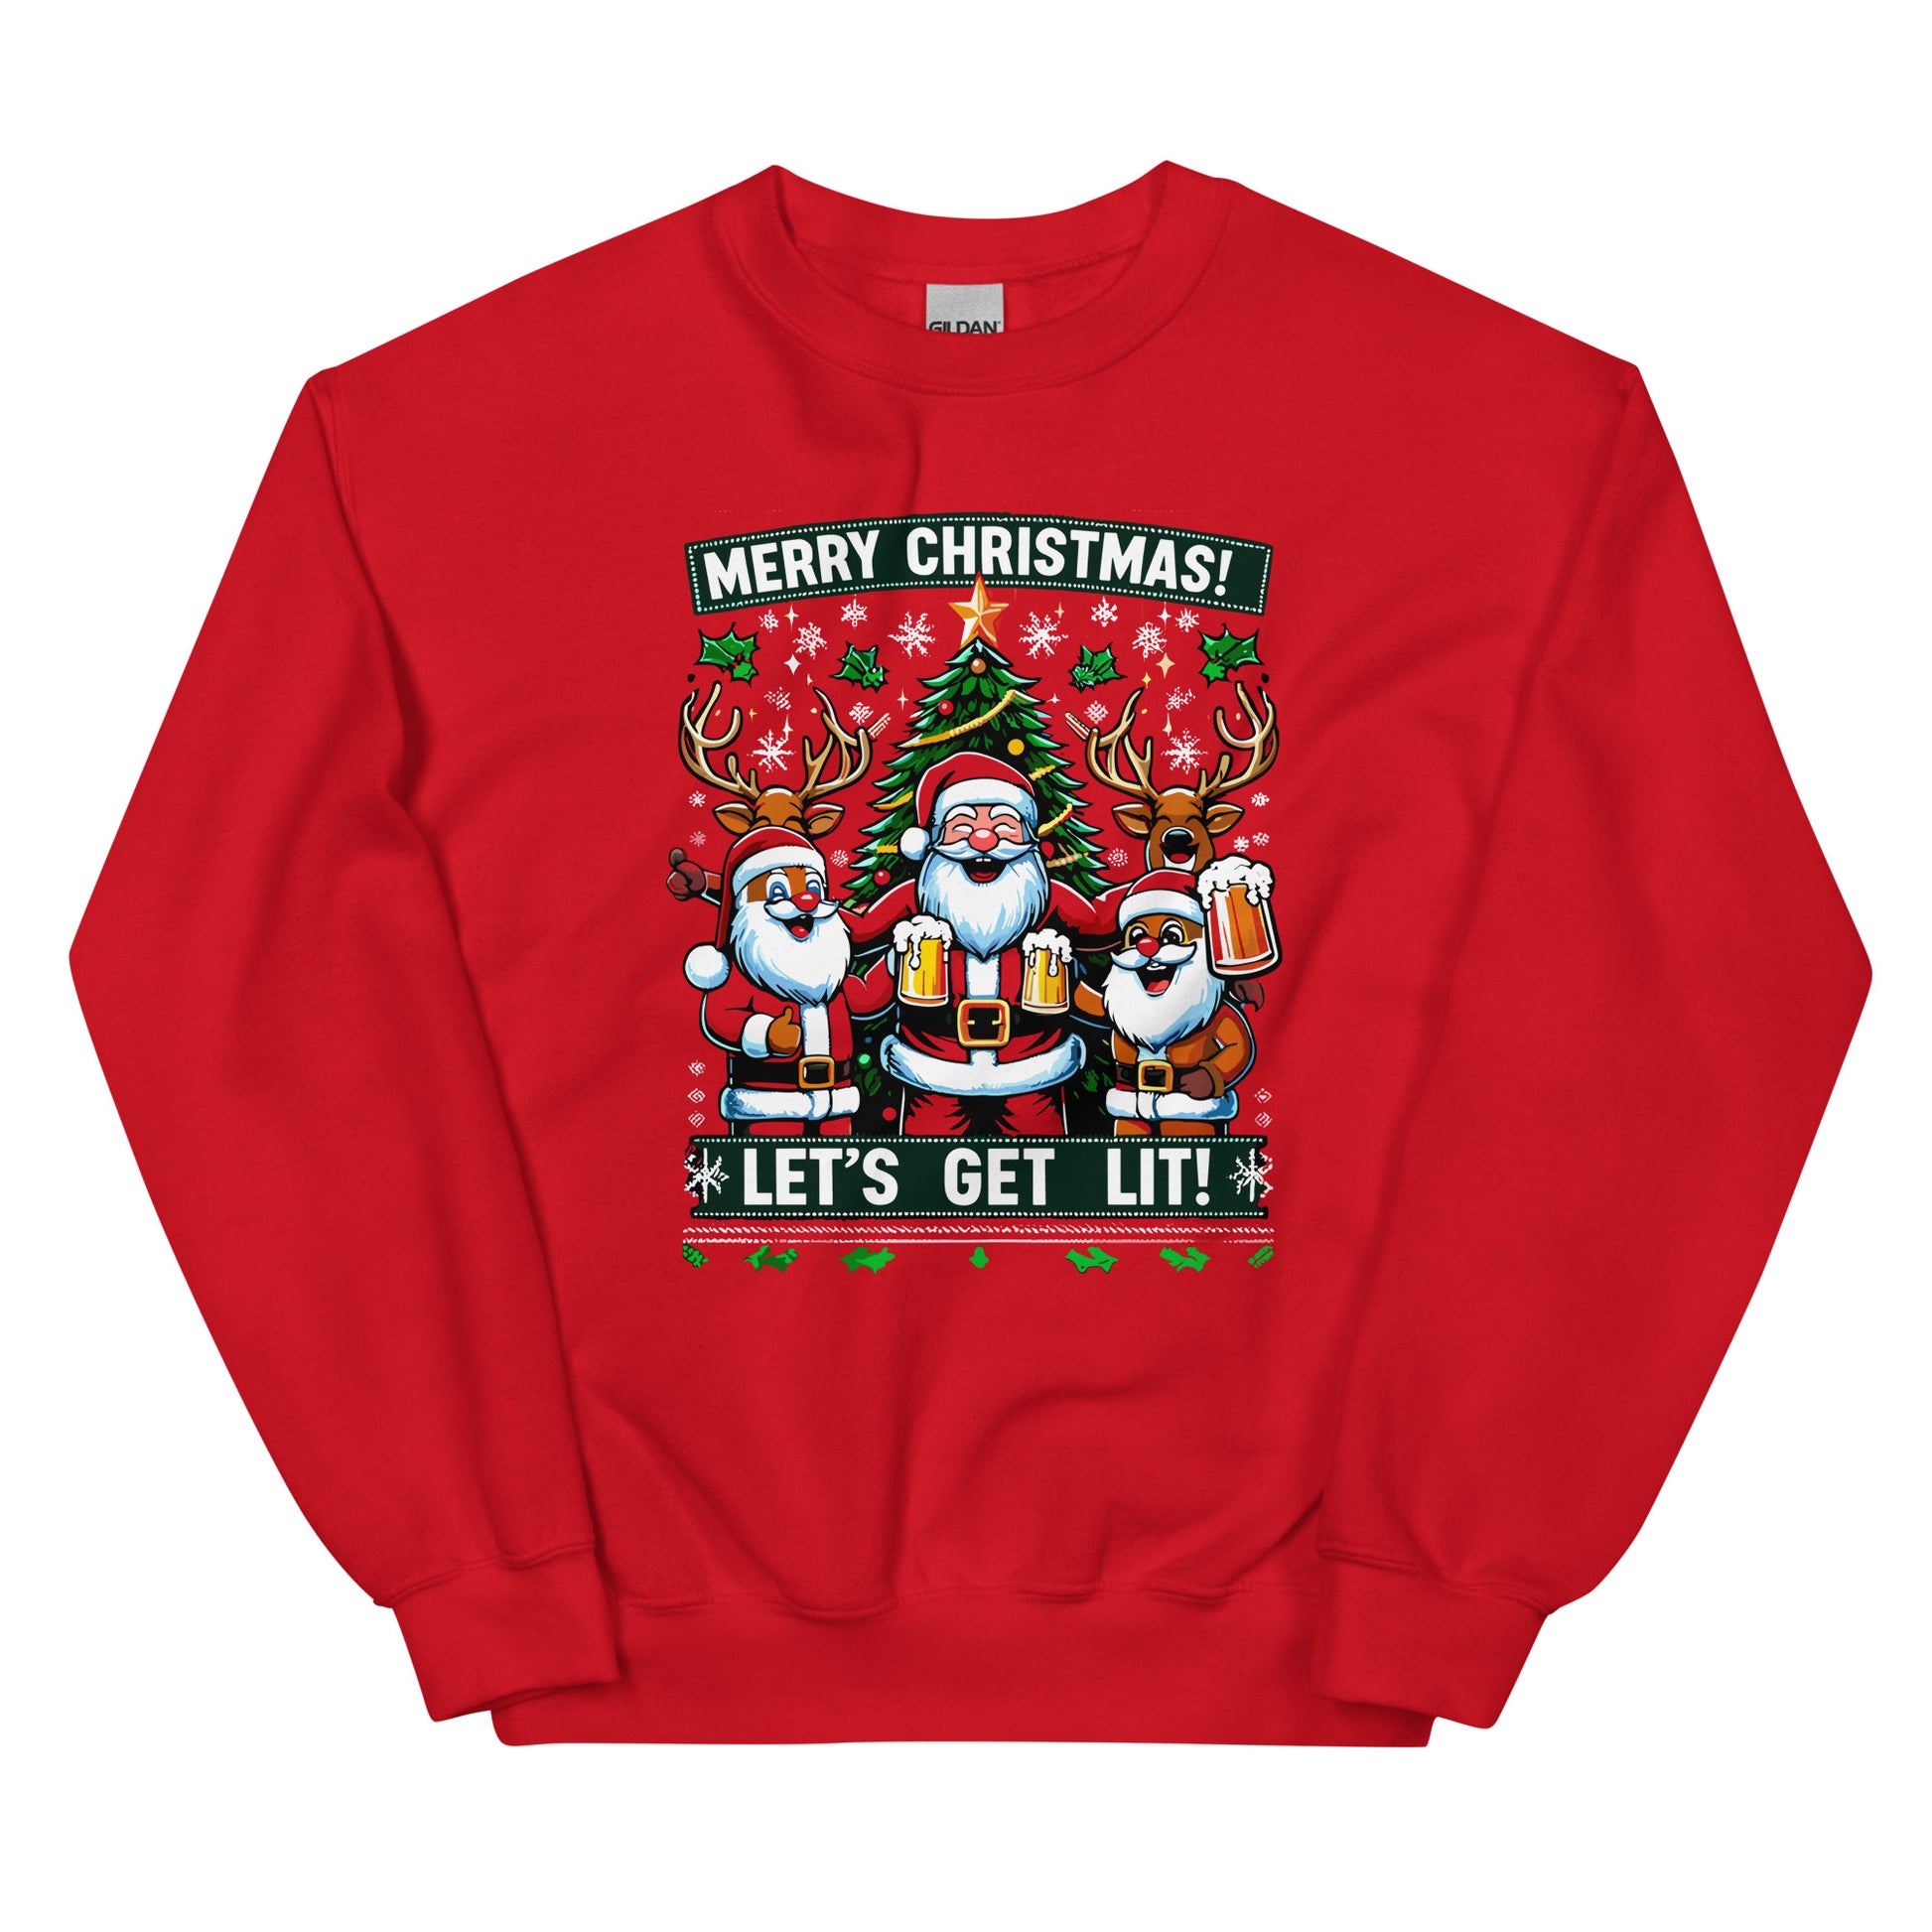 Merry Christmas lets get lit with santa printed ugly christmas sweater by Whistler Shirts